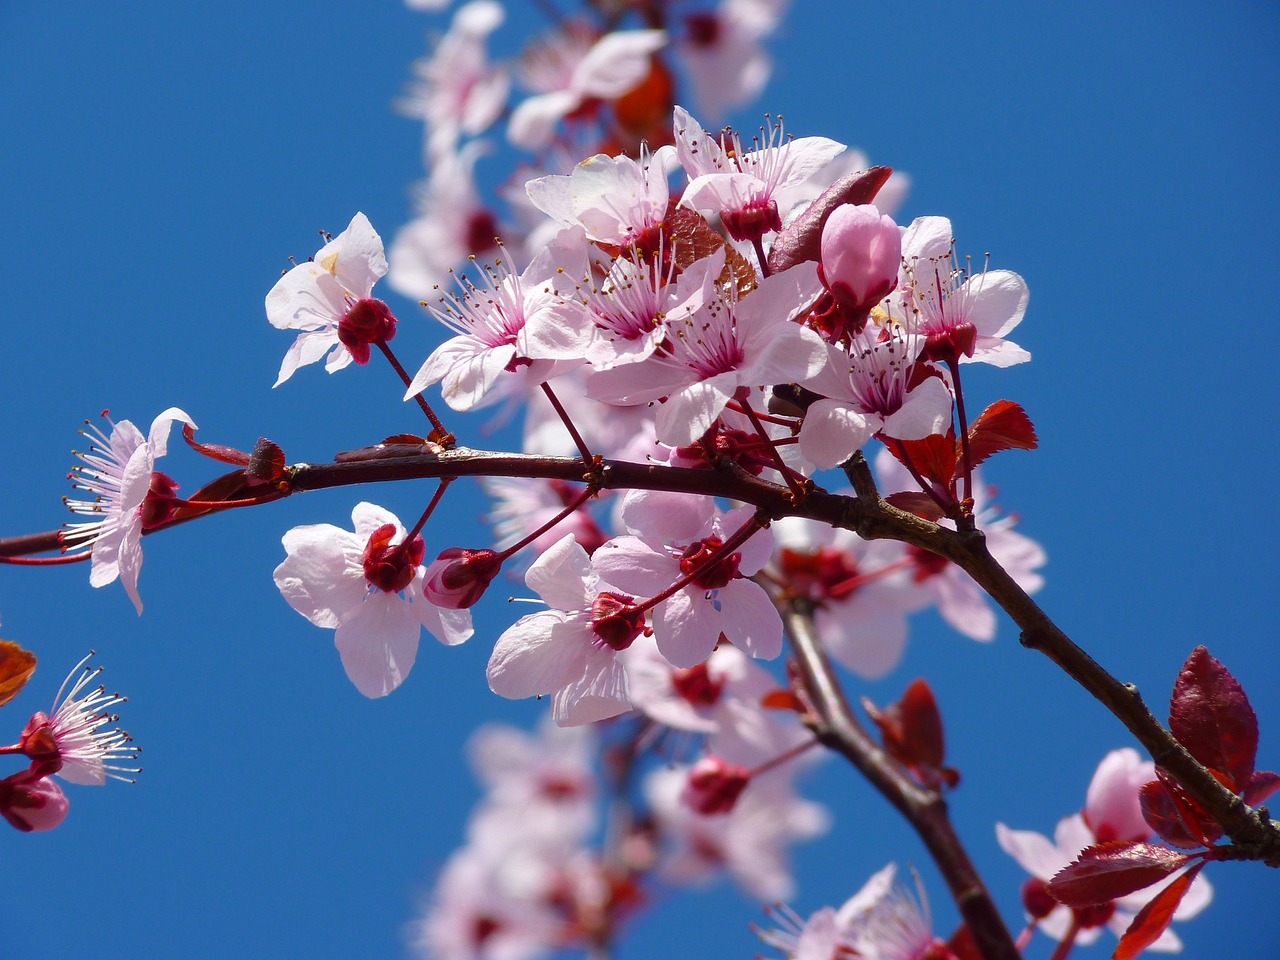 How to Plant a Cherry Tree